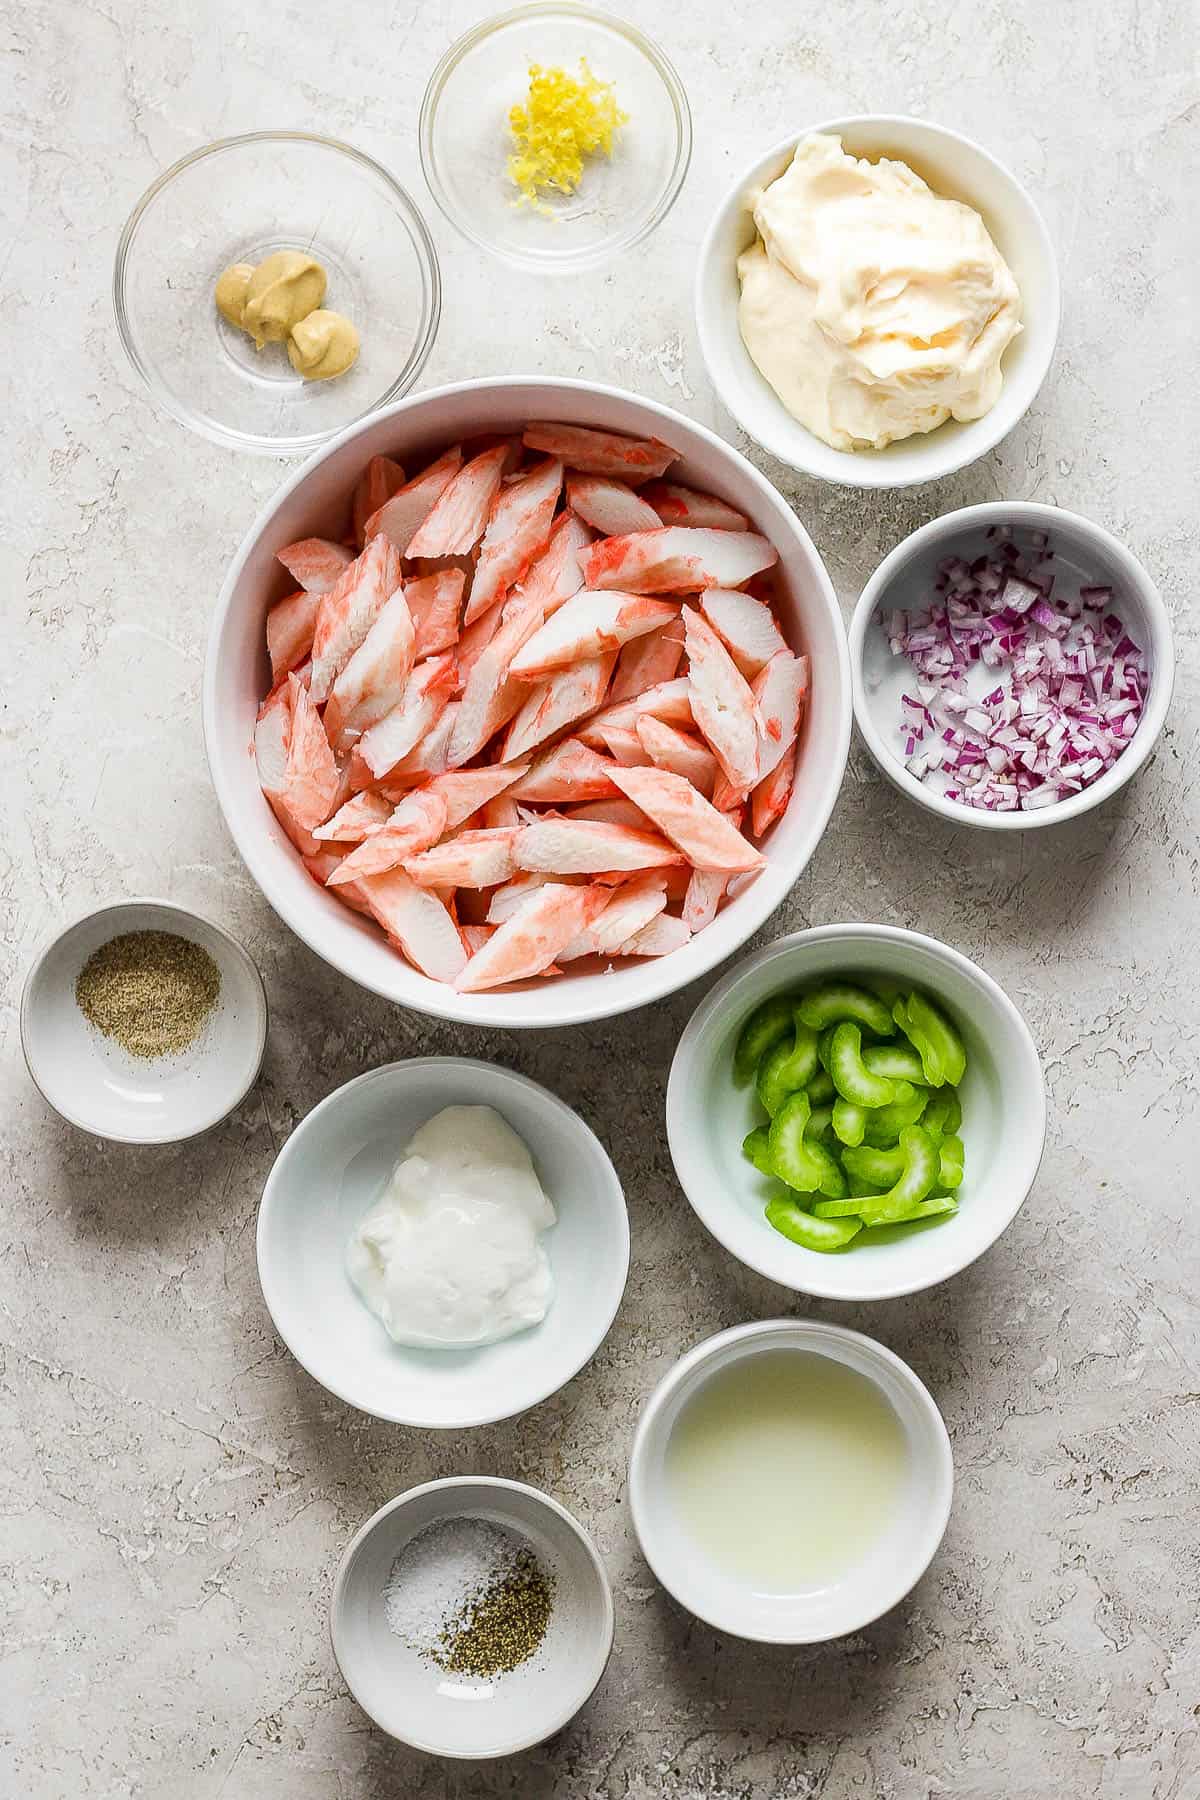 Ingredients for crab salad in separate bowls.